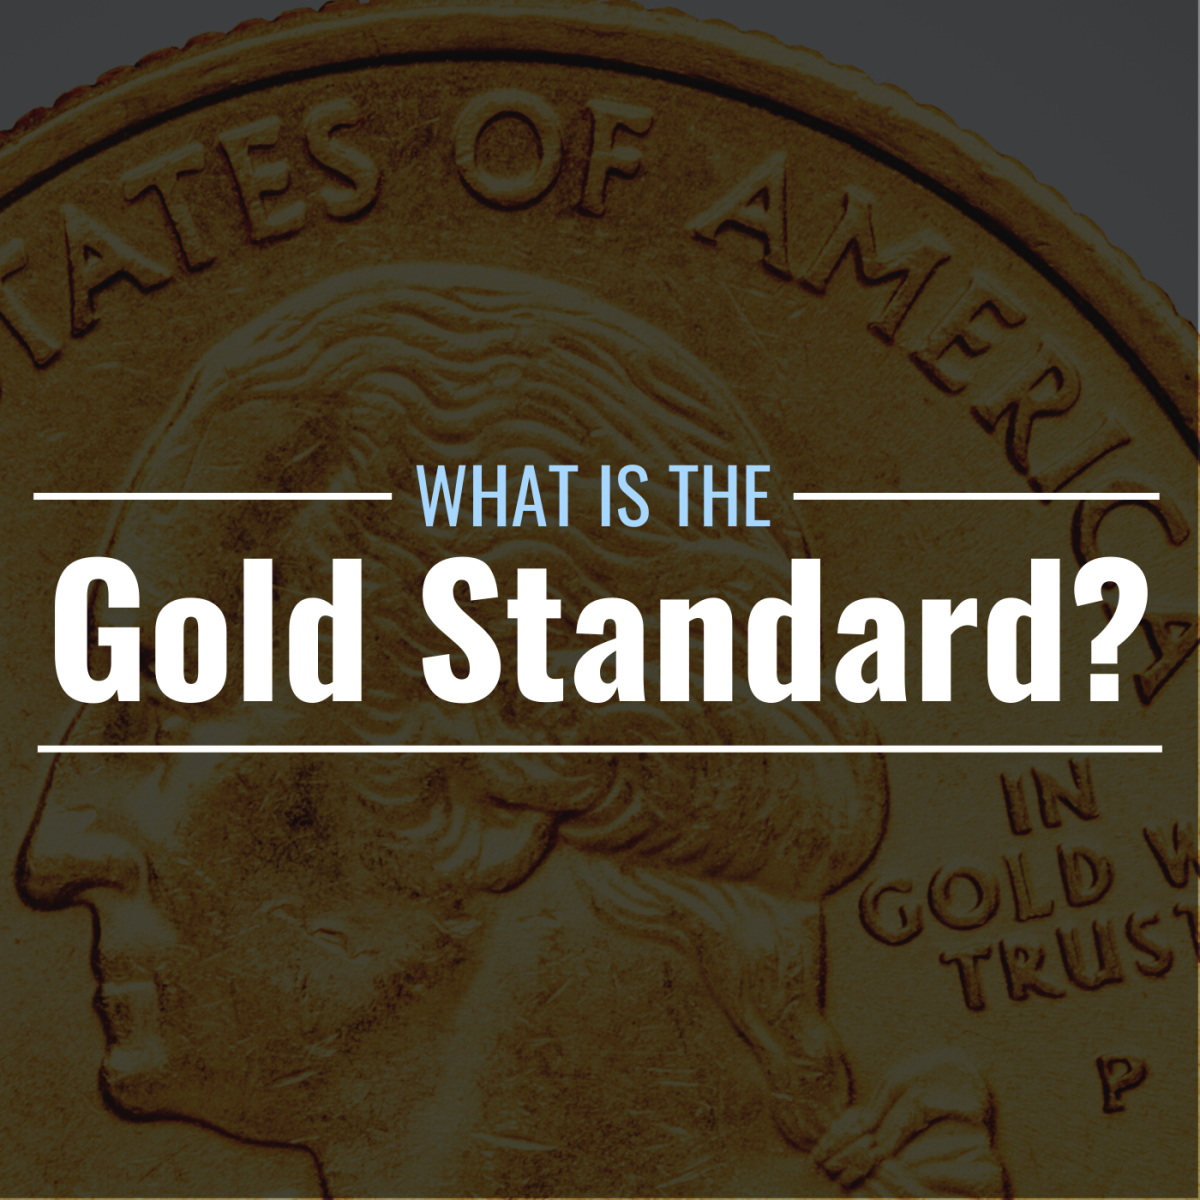 Gold standard, Definition & History